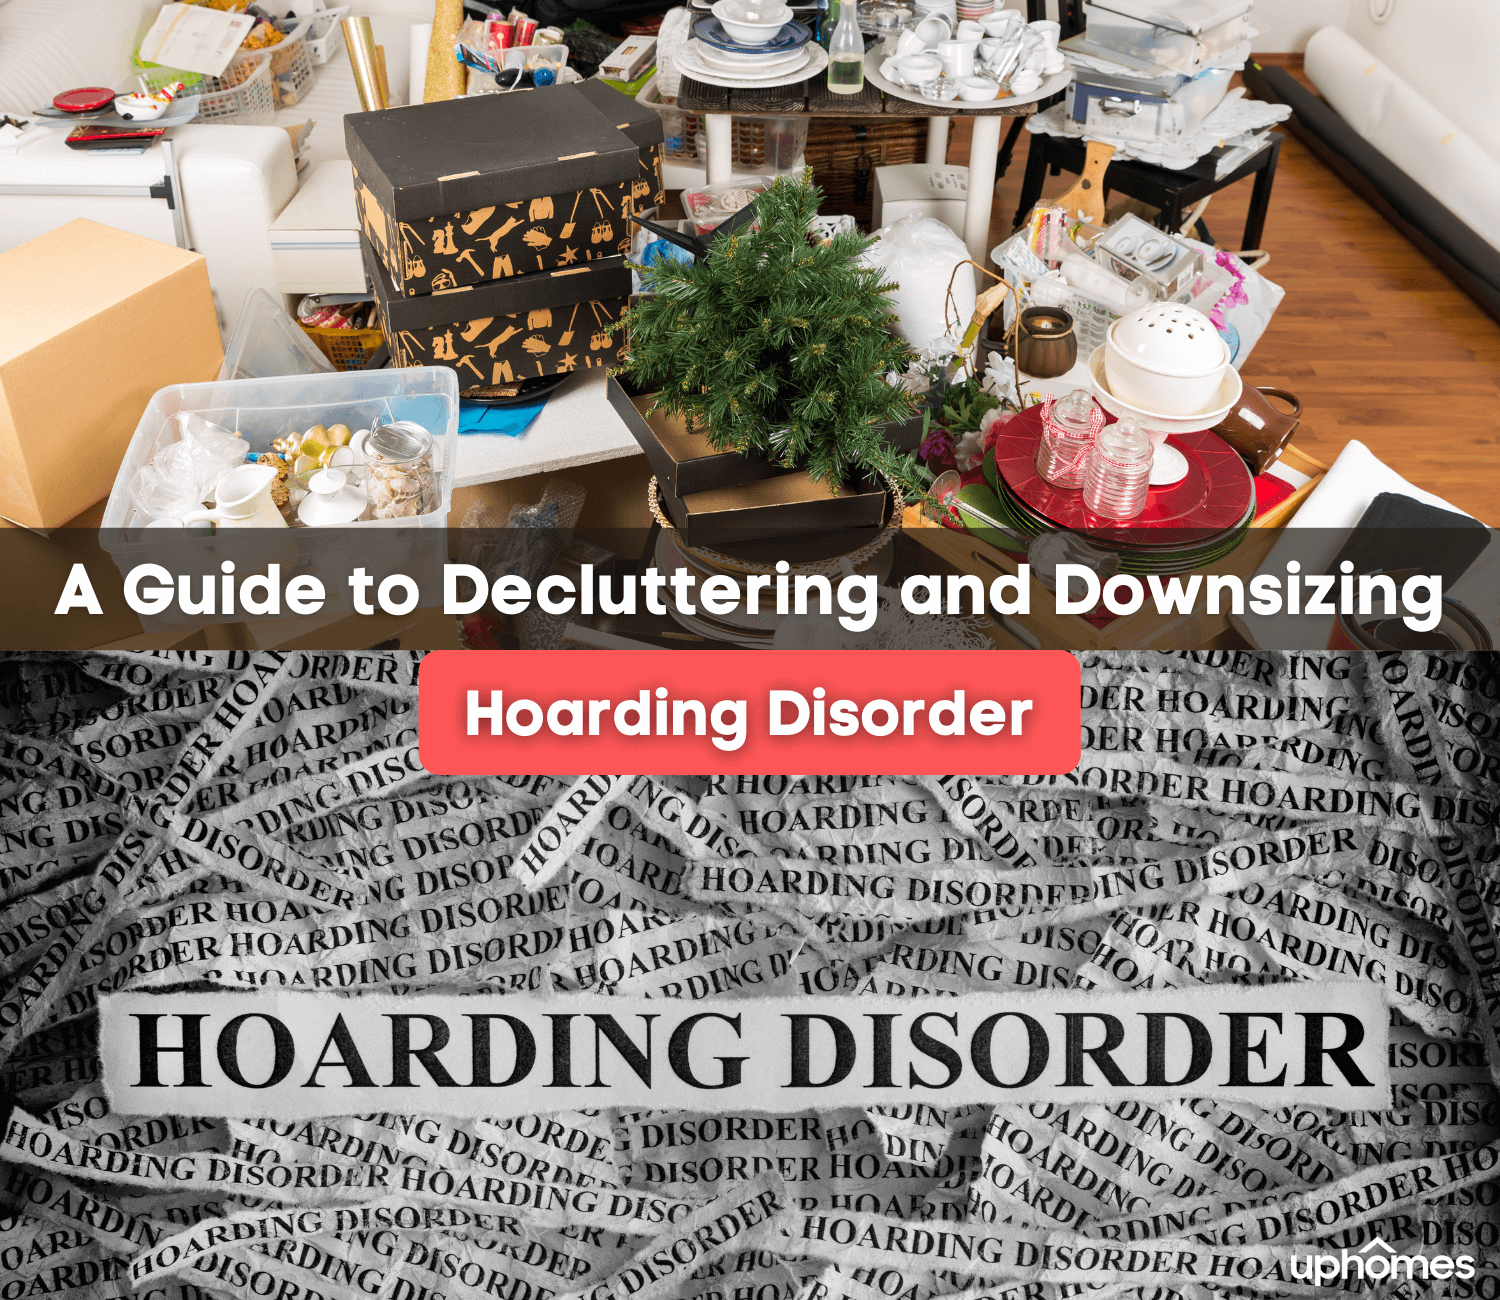 Hoarding Disorder: A Guide to Decluttering and Downsizing for Hoarders and Their Loved Ones